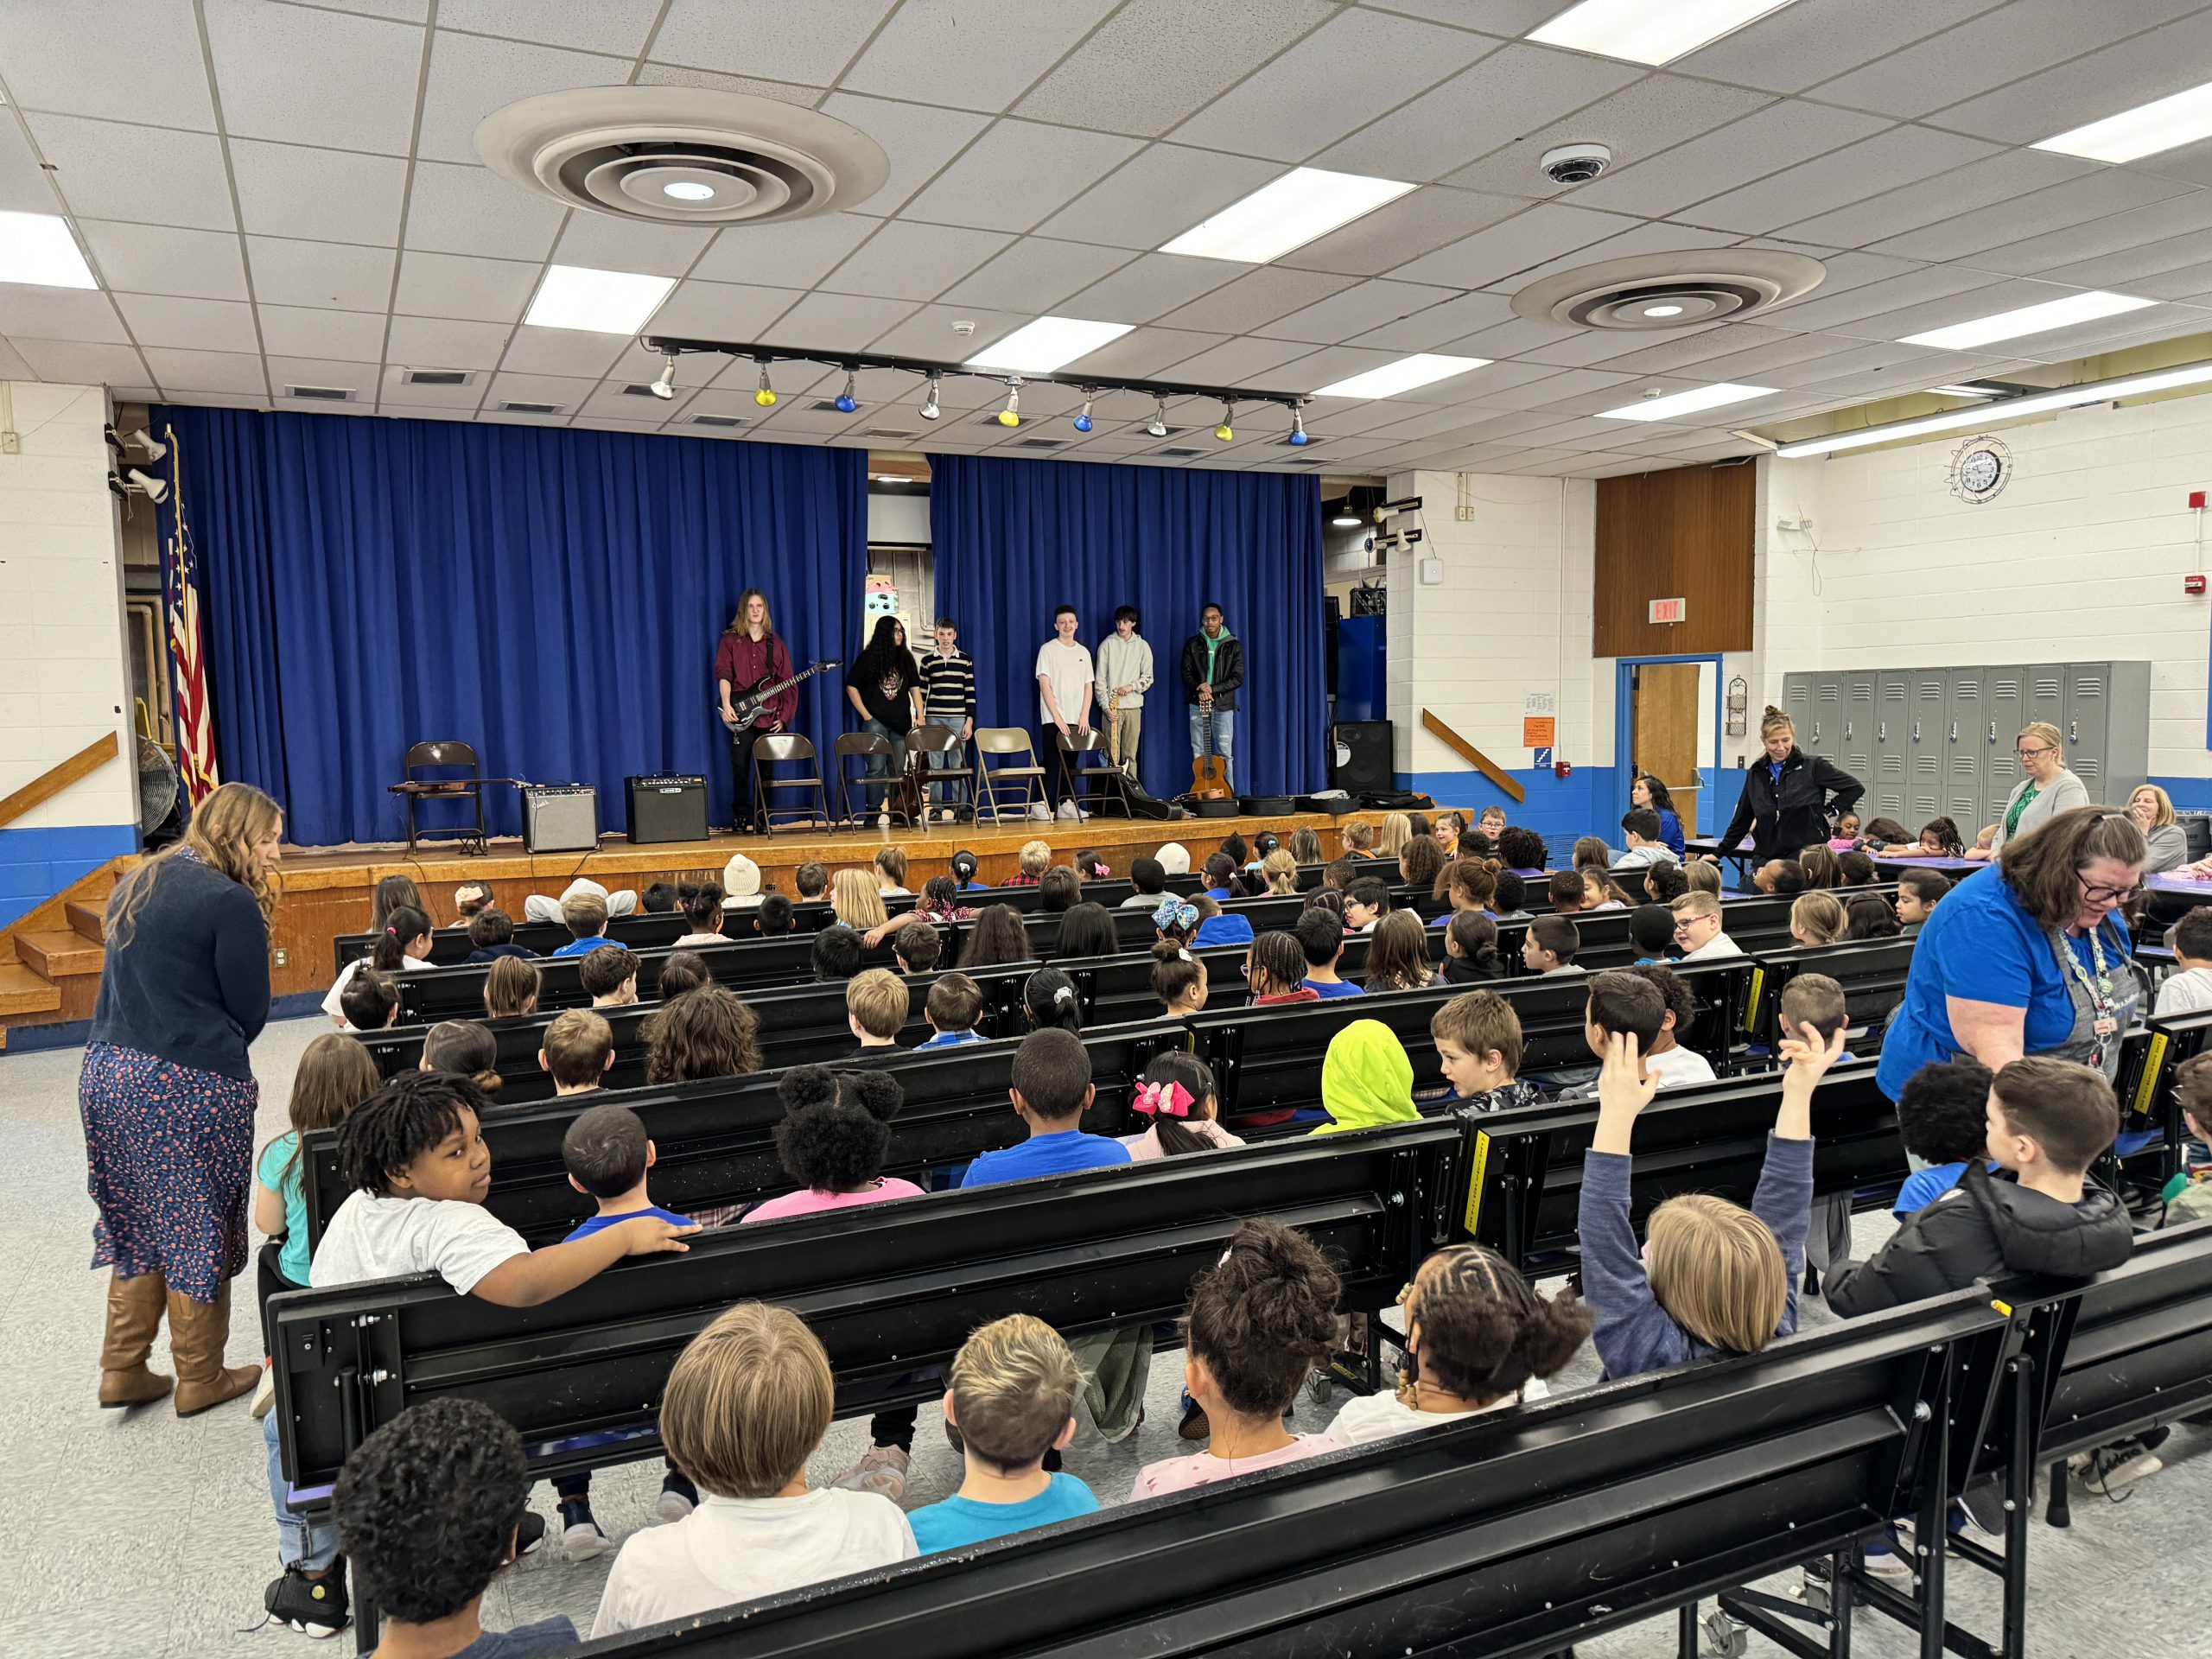 an audience full of students watches older students play guitar on stage. 